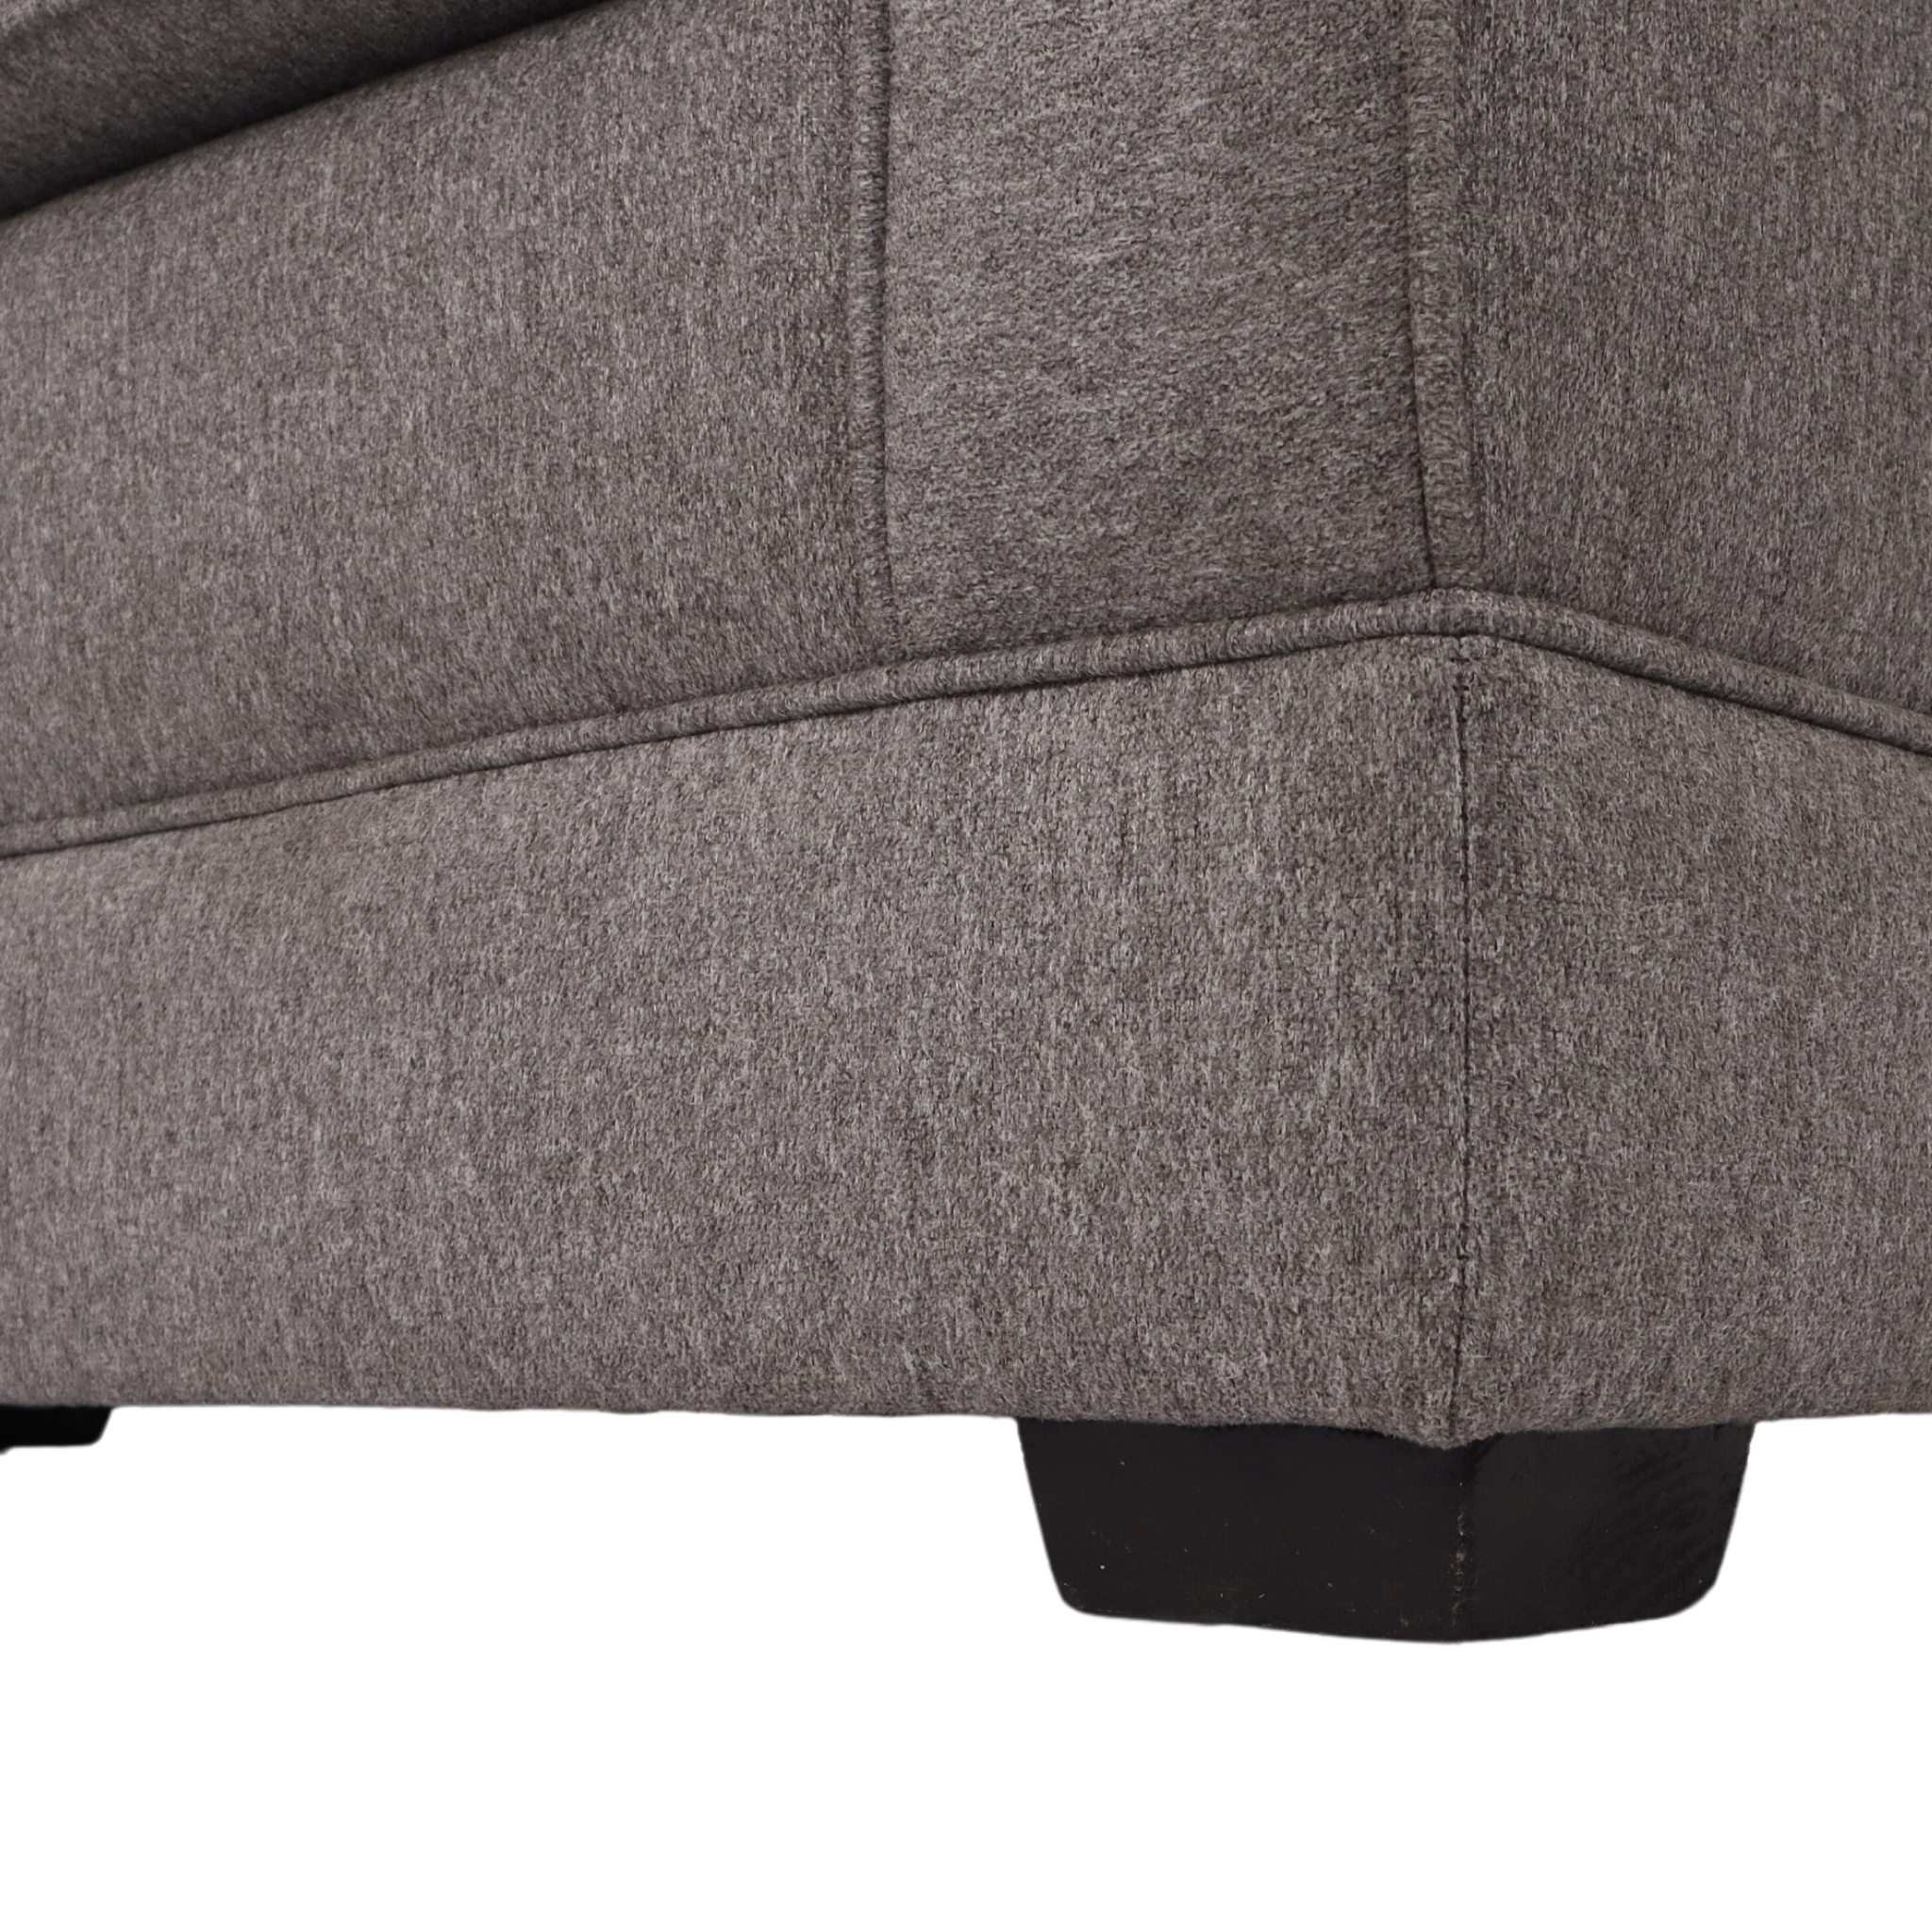 KENNETH Fabric Sofa with Pull-Out Bed AF Home